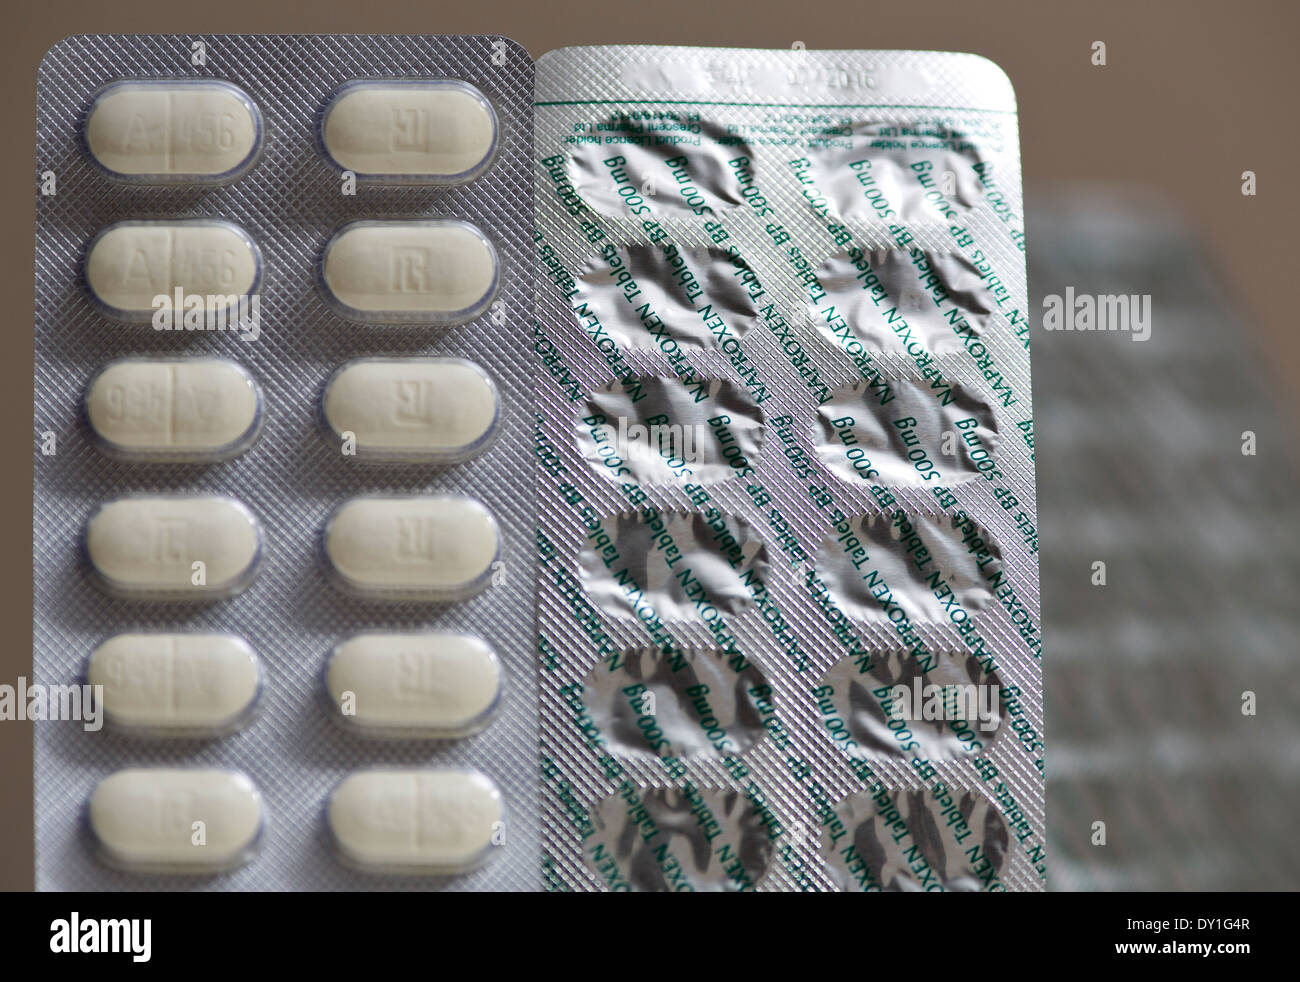 Naproxen 500mg enteric coated tablets a non-steroidal anti-inflammatory drug (NSAID). Stock Photo